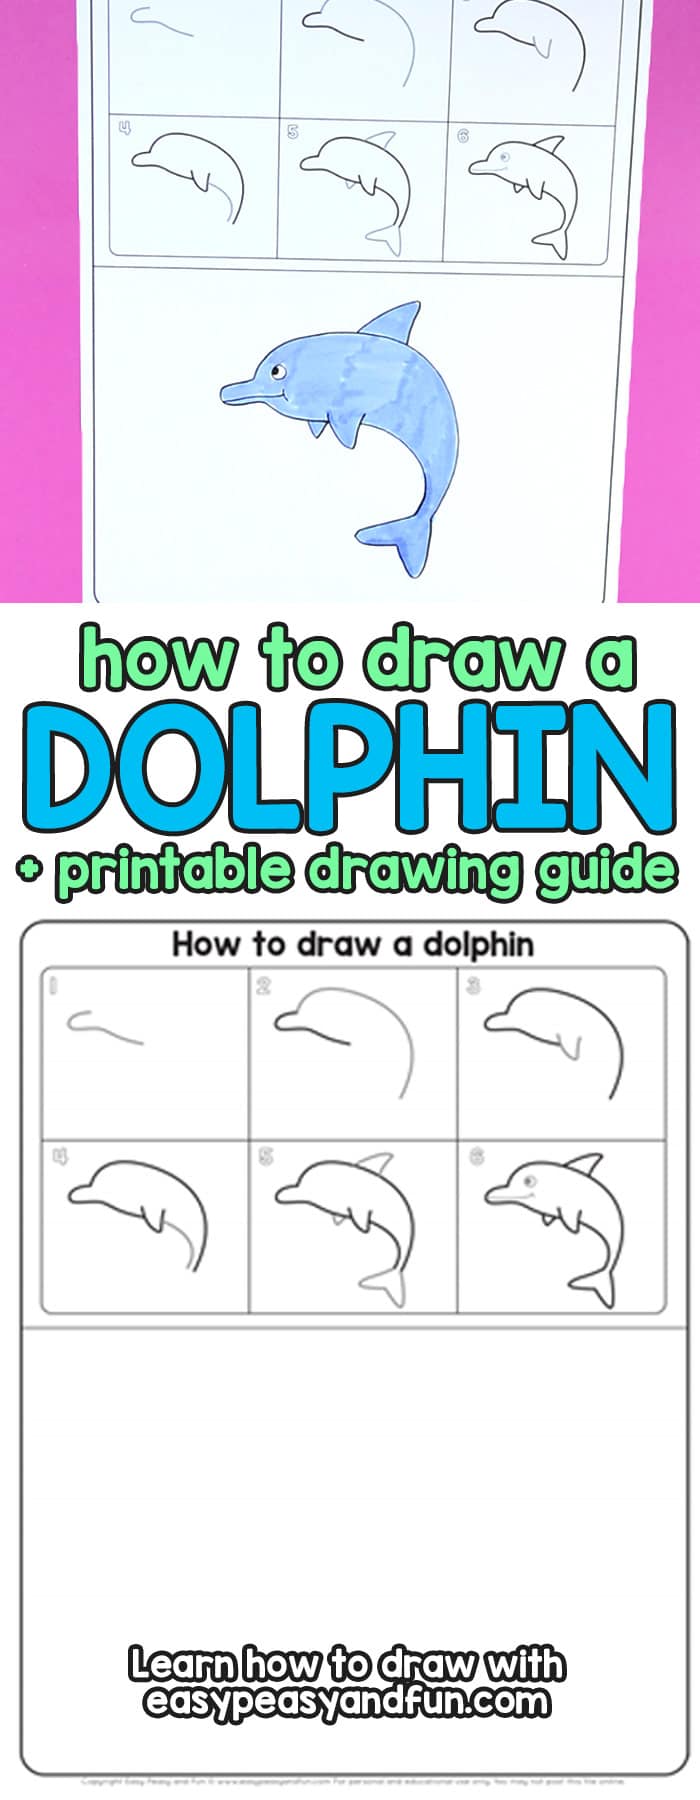 Learn how to jump out of the water and draw a dolphin - step by step tutorial for kids